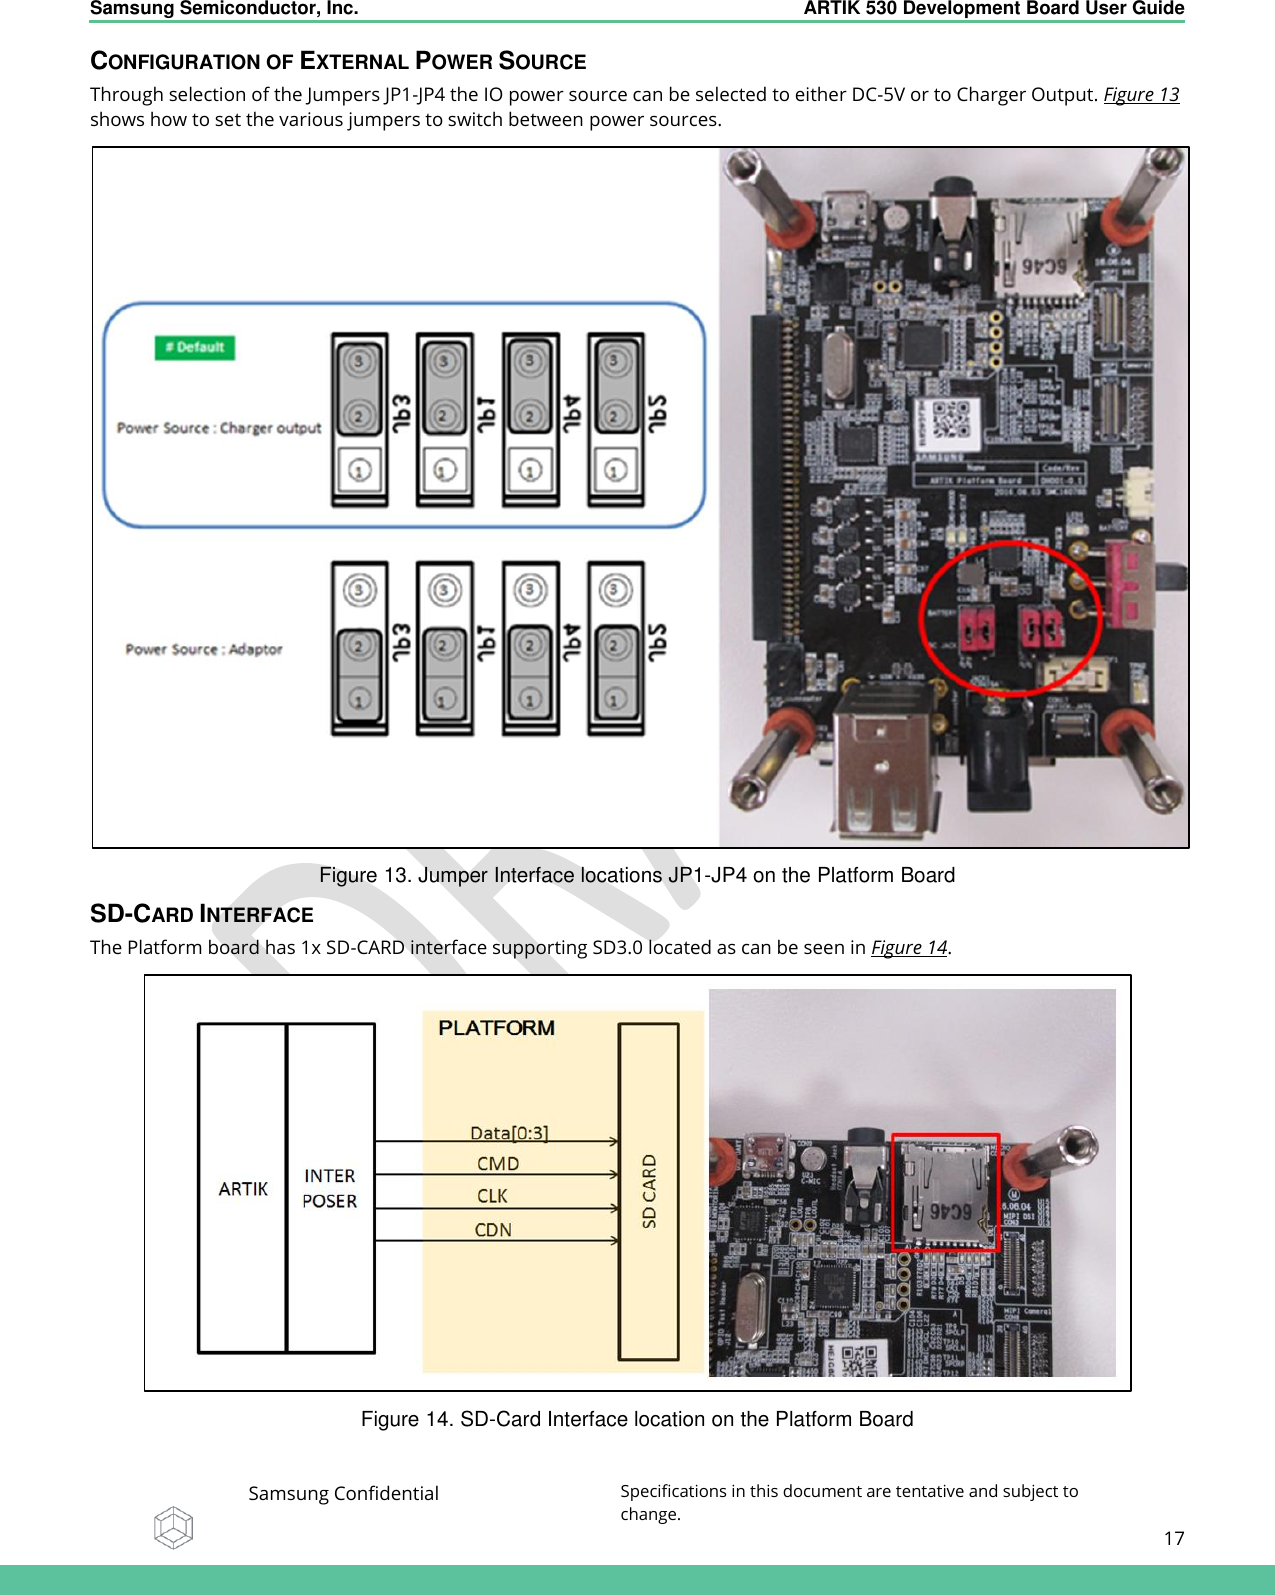    Samsung Semiconductor, Inc.  ARTIK 530 Development Board User Guide   Samsung Confidential Specifications in this document are tentative and subject to change.  17   CONFIGURATION OF EXTERNAL POWER SOURCE Through selection of the Jumpers JP1-JP4 the IO power source can be selected to either DC-5V or to Charger Output. Figure 13 shows how to set the various jumpers to switch between power sources.  Figure 13. Jumper Interface locations JP1-JP4 on the Platform Board SD-CARD INTERFACE The Platform board has 1x SD-CARD interface supporting SD3.0 located as can be seen in Figure 14.   Figure 14. SD-Card Interface location on the Platform Board 